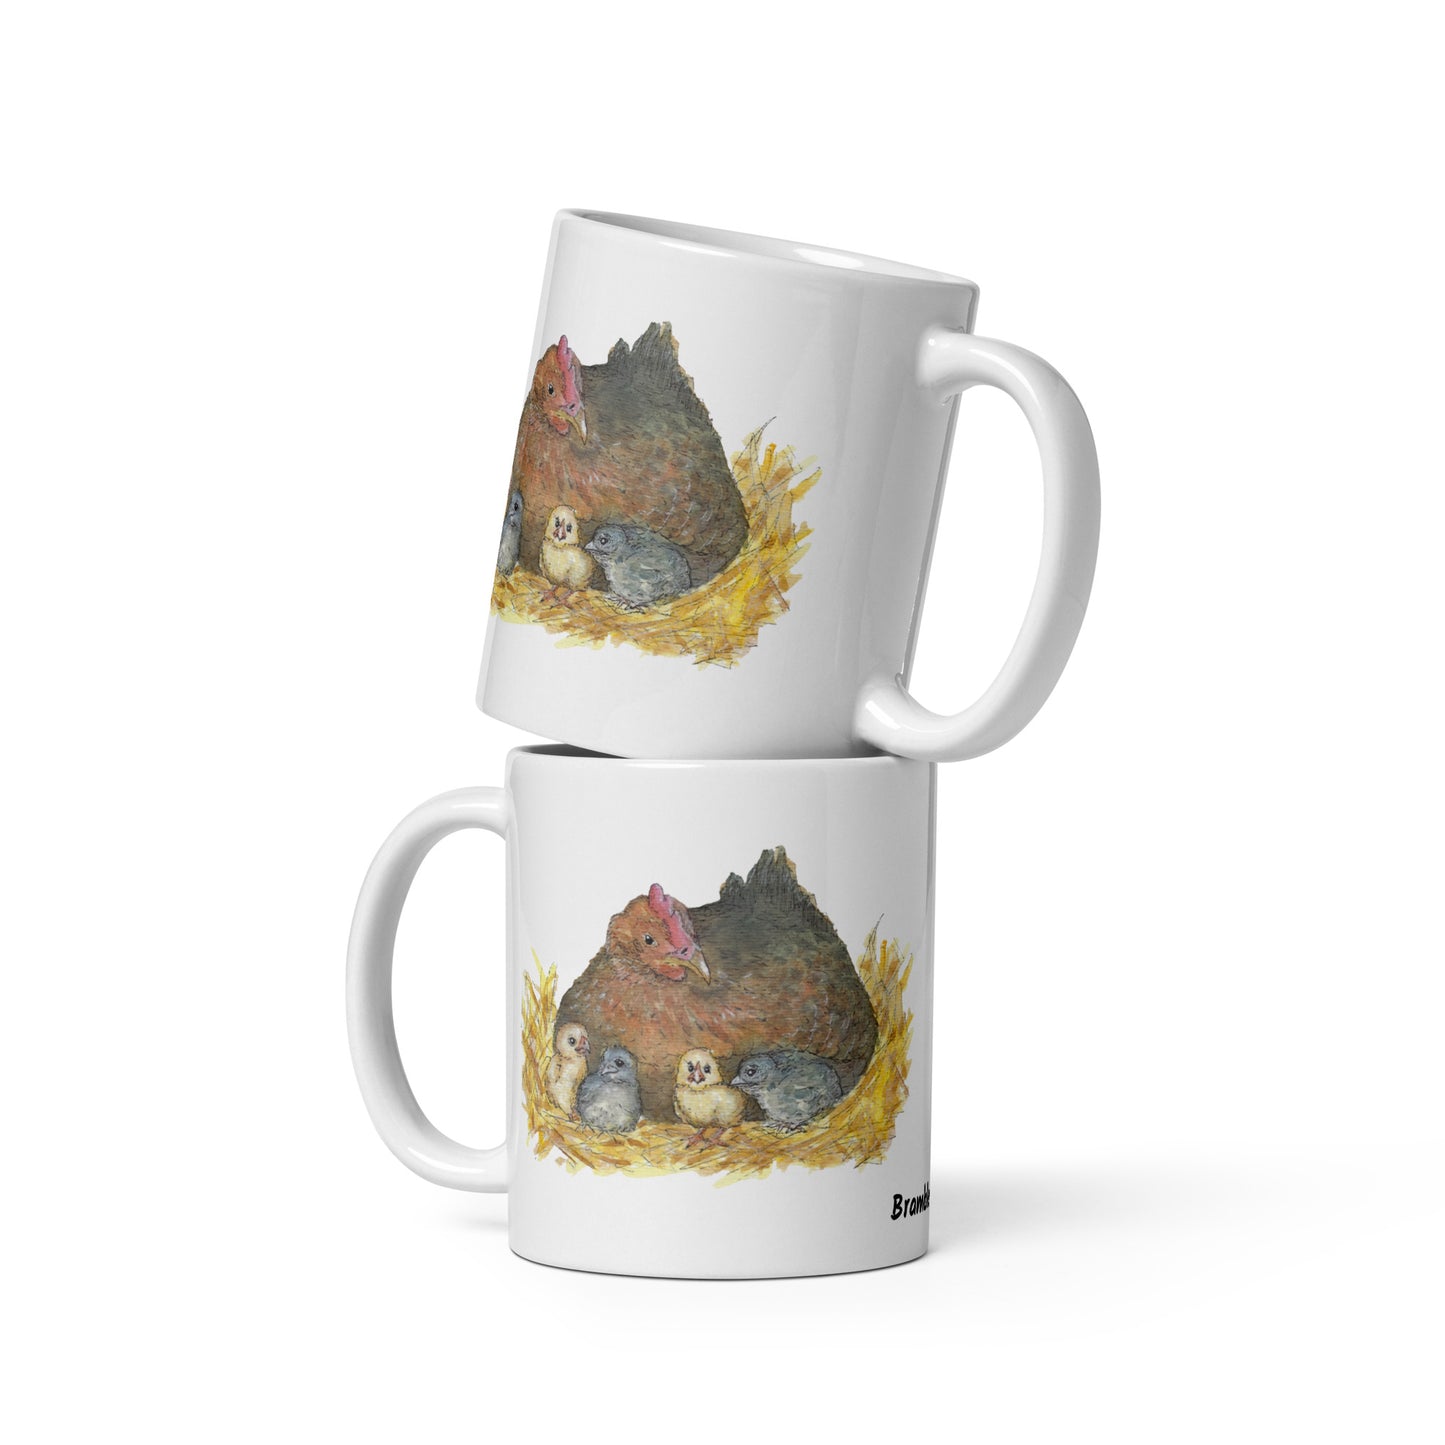 11 ounce white ceramic mug. Features double-sided print of a watercolor mother hen and chicks. Dishwasher and microwave safe.